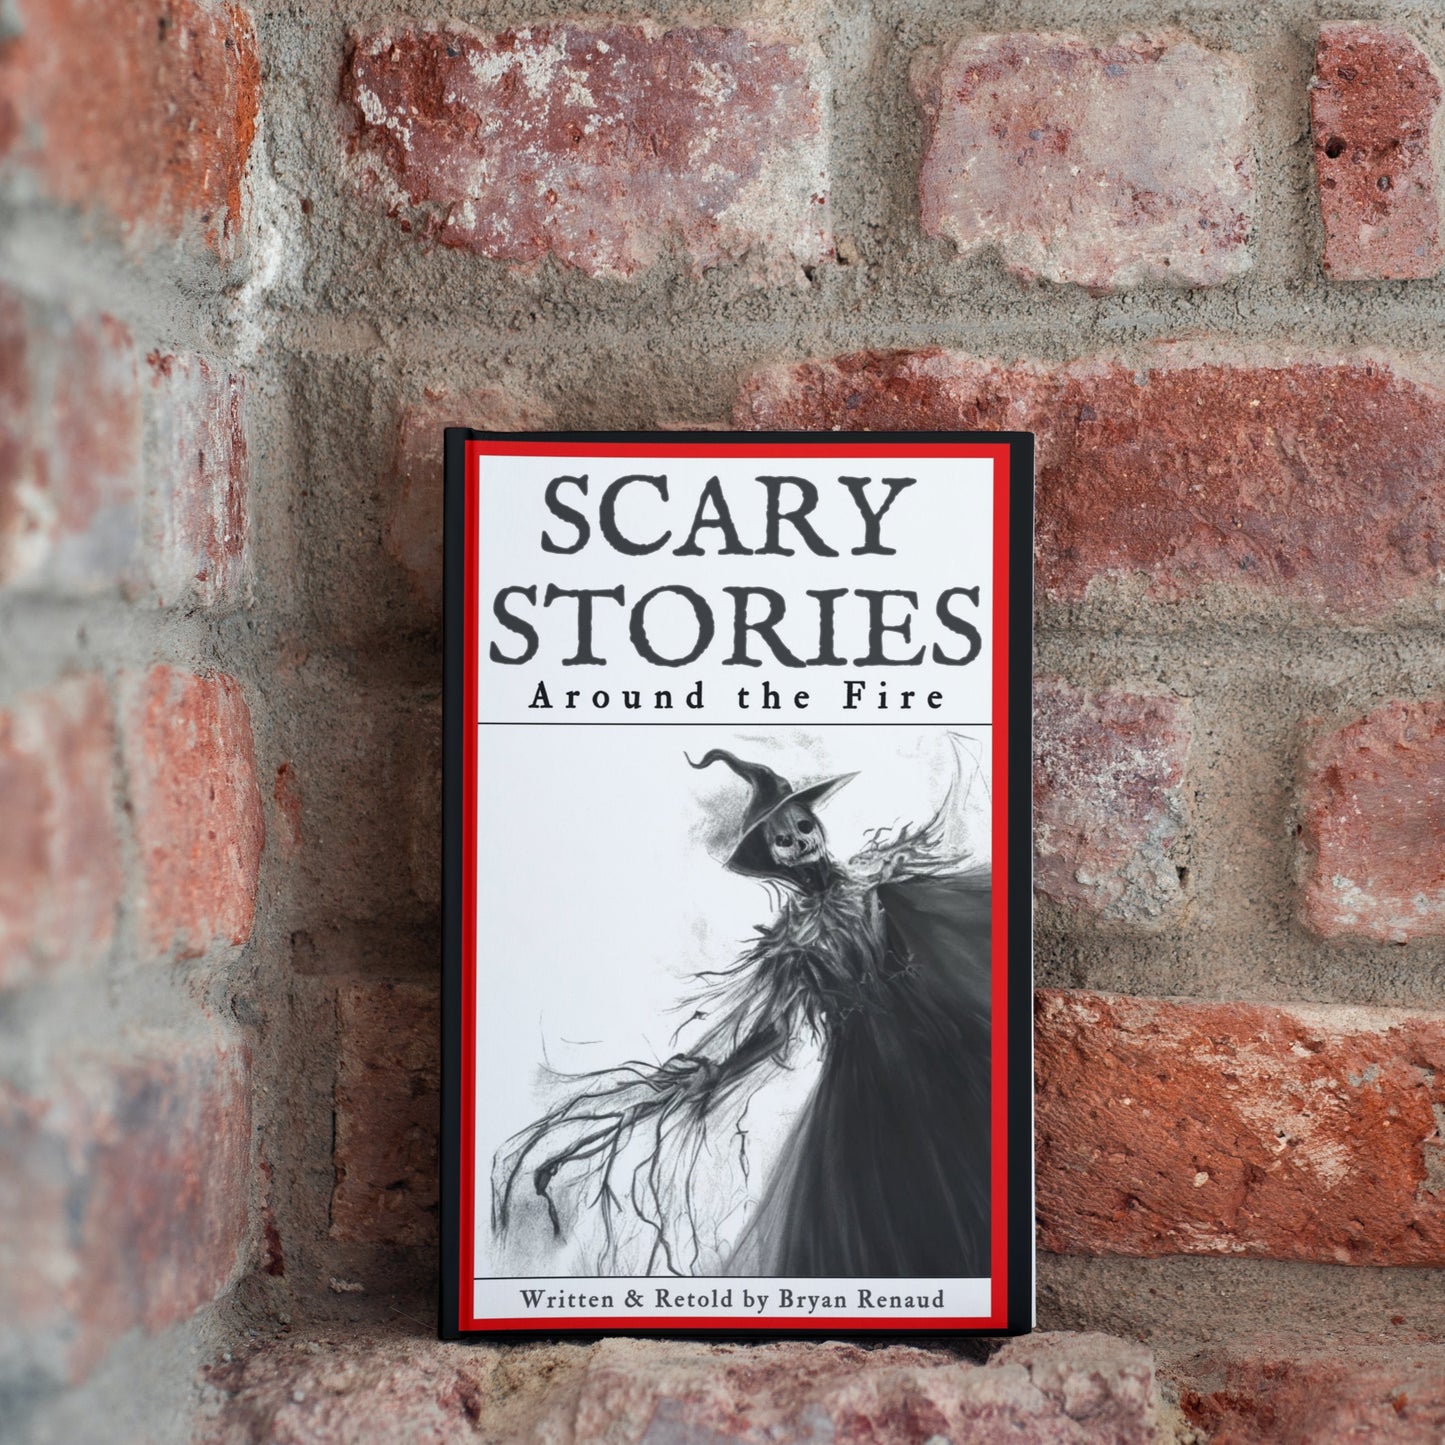 Scary Stories Around the Fire: 13 Chilling Tales! (Paperback Bestseller) by Bryan Renaud - Asylum Books